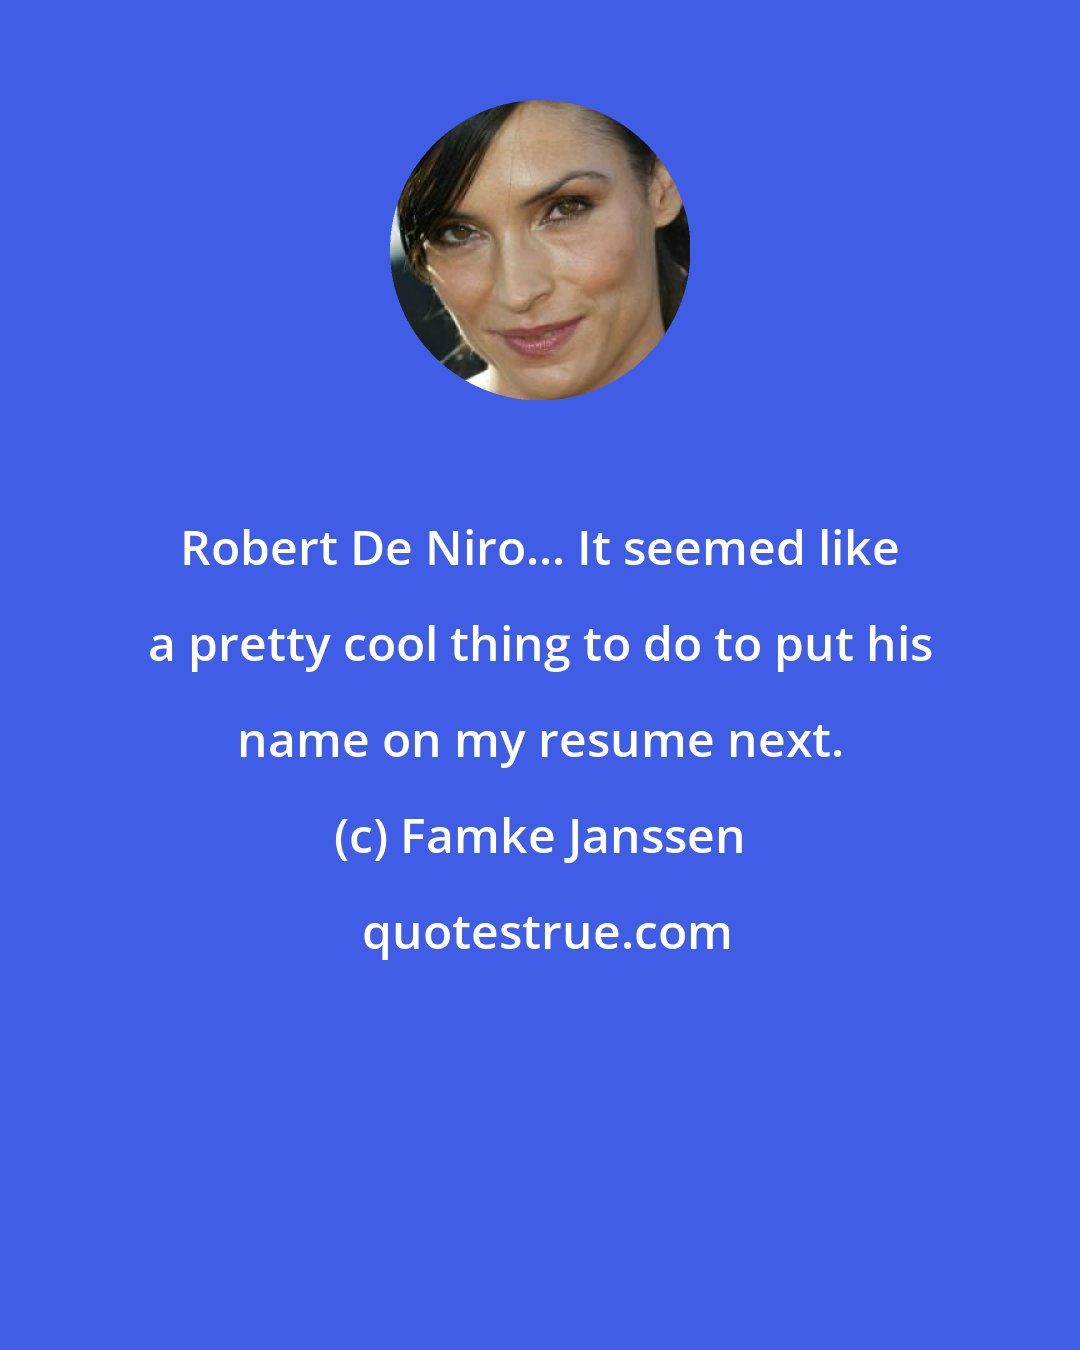 Famke Janssen: Robert De Niro... It seemed like a pretty cool thing to do to put his name on my resume next.